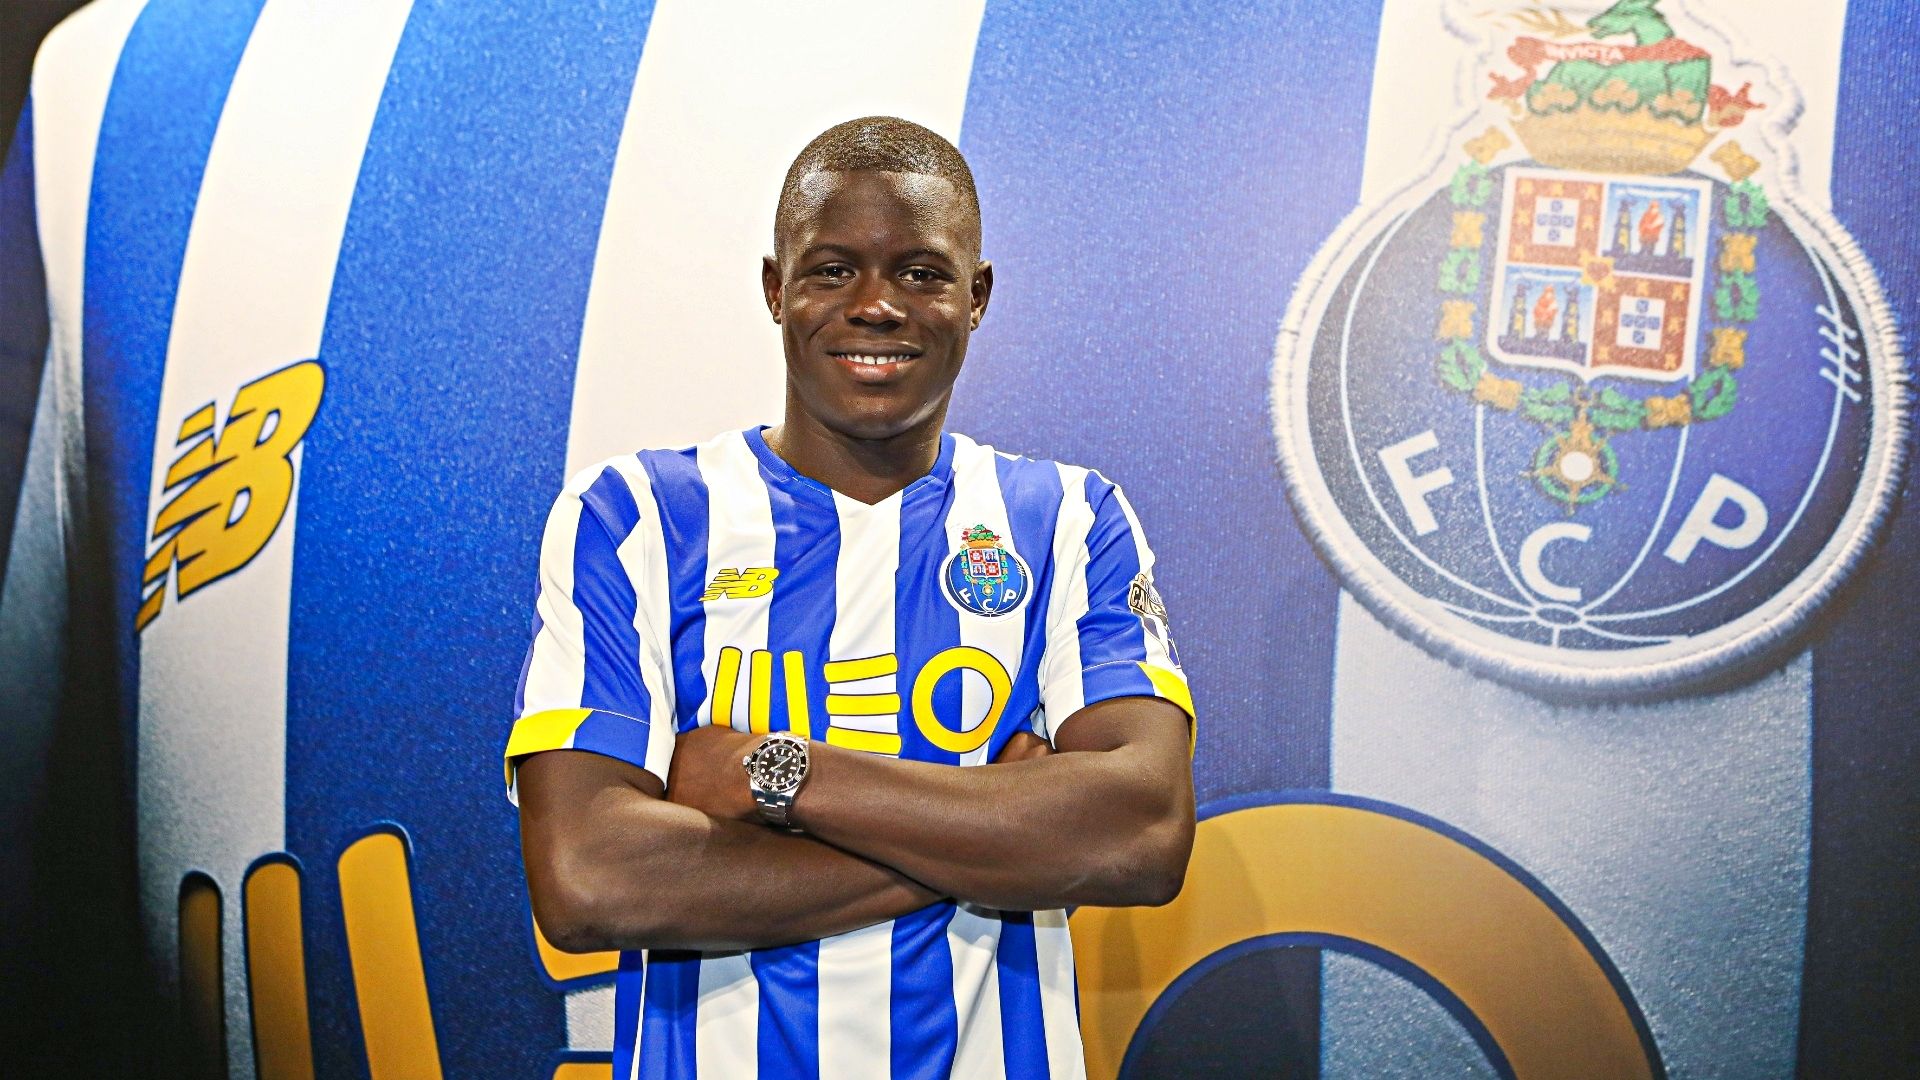 CONFIRMED: Malang Sarr joins Porto on one year loan » Chelsea News